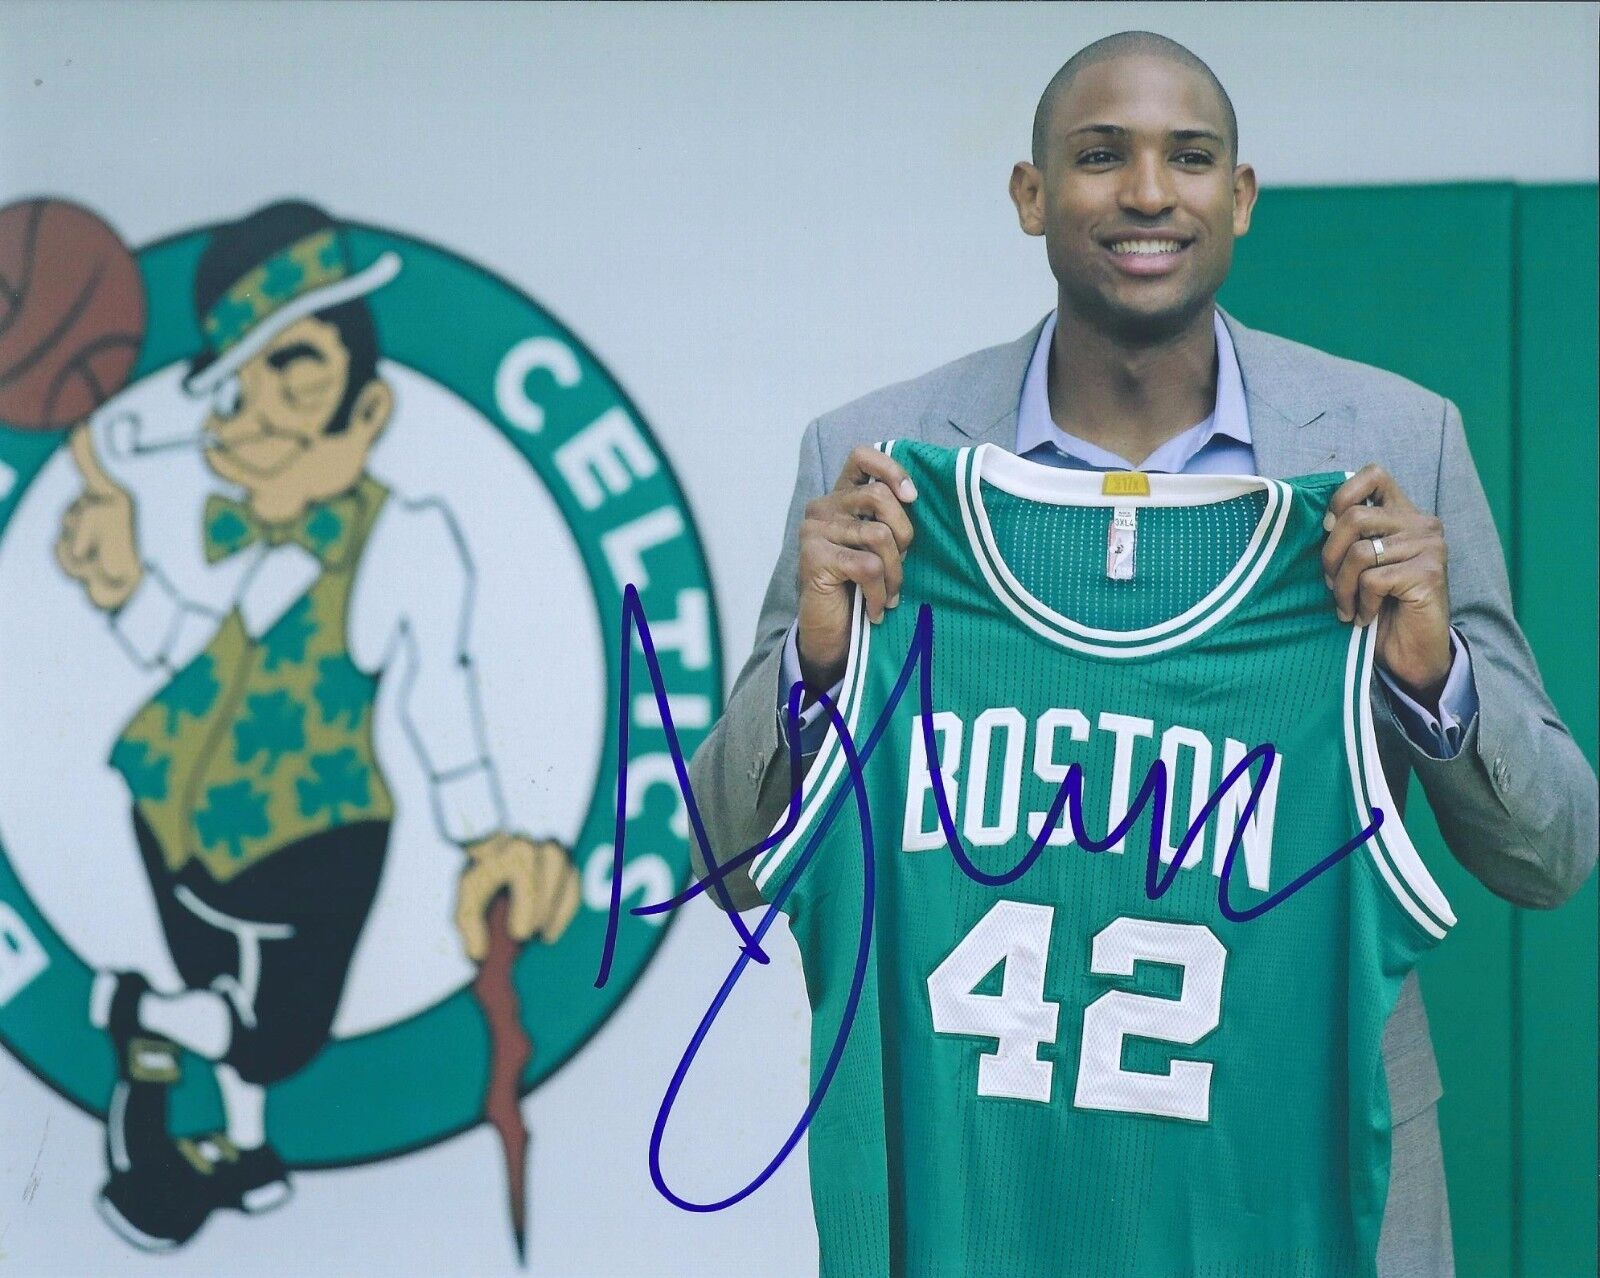 AL HORFORD Signed Autographed 8x10 Photo Poster painting NEW 2017 BOSTON CELTICS STAR